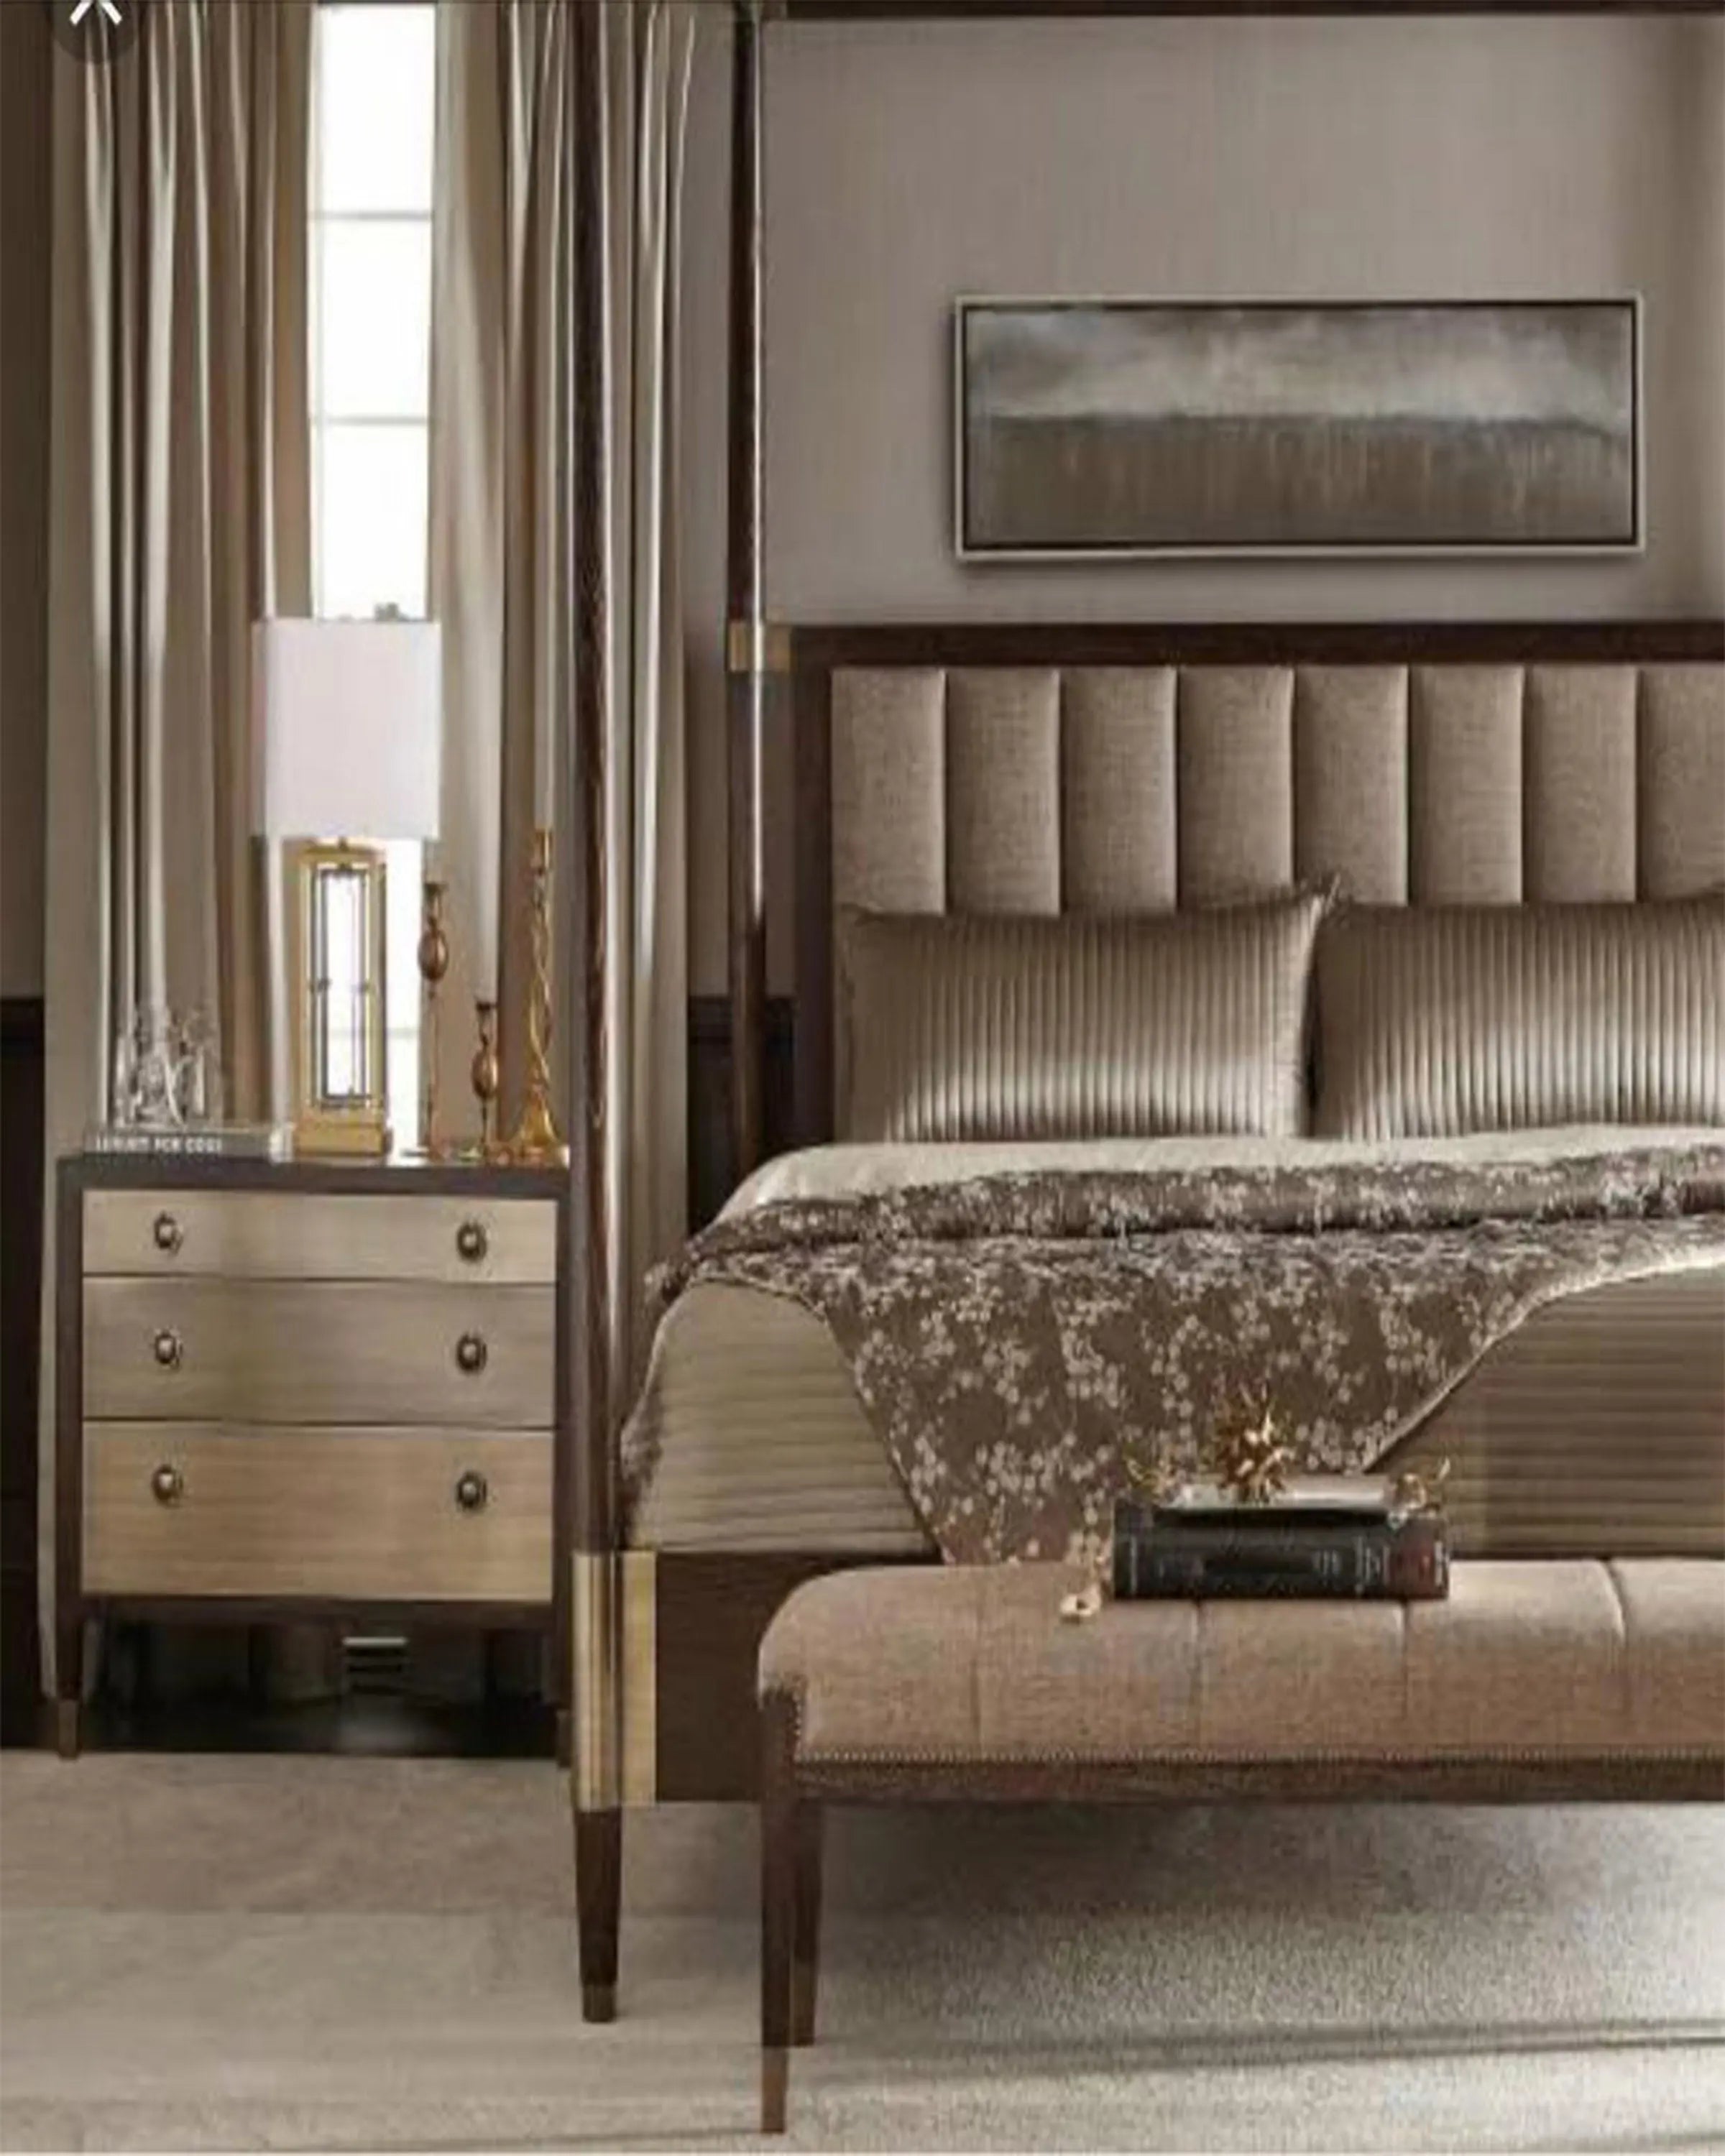 PEARL LUXURY BED SET ANGIE HOMES